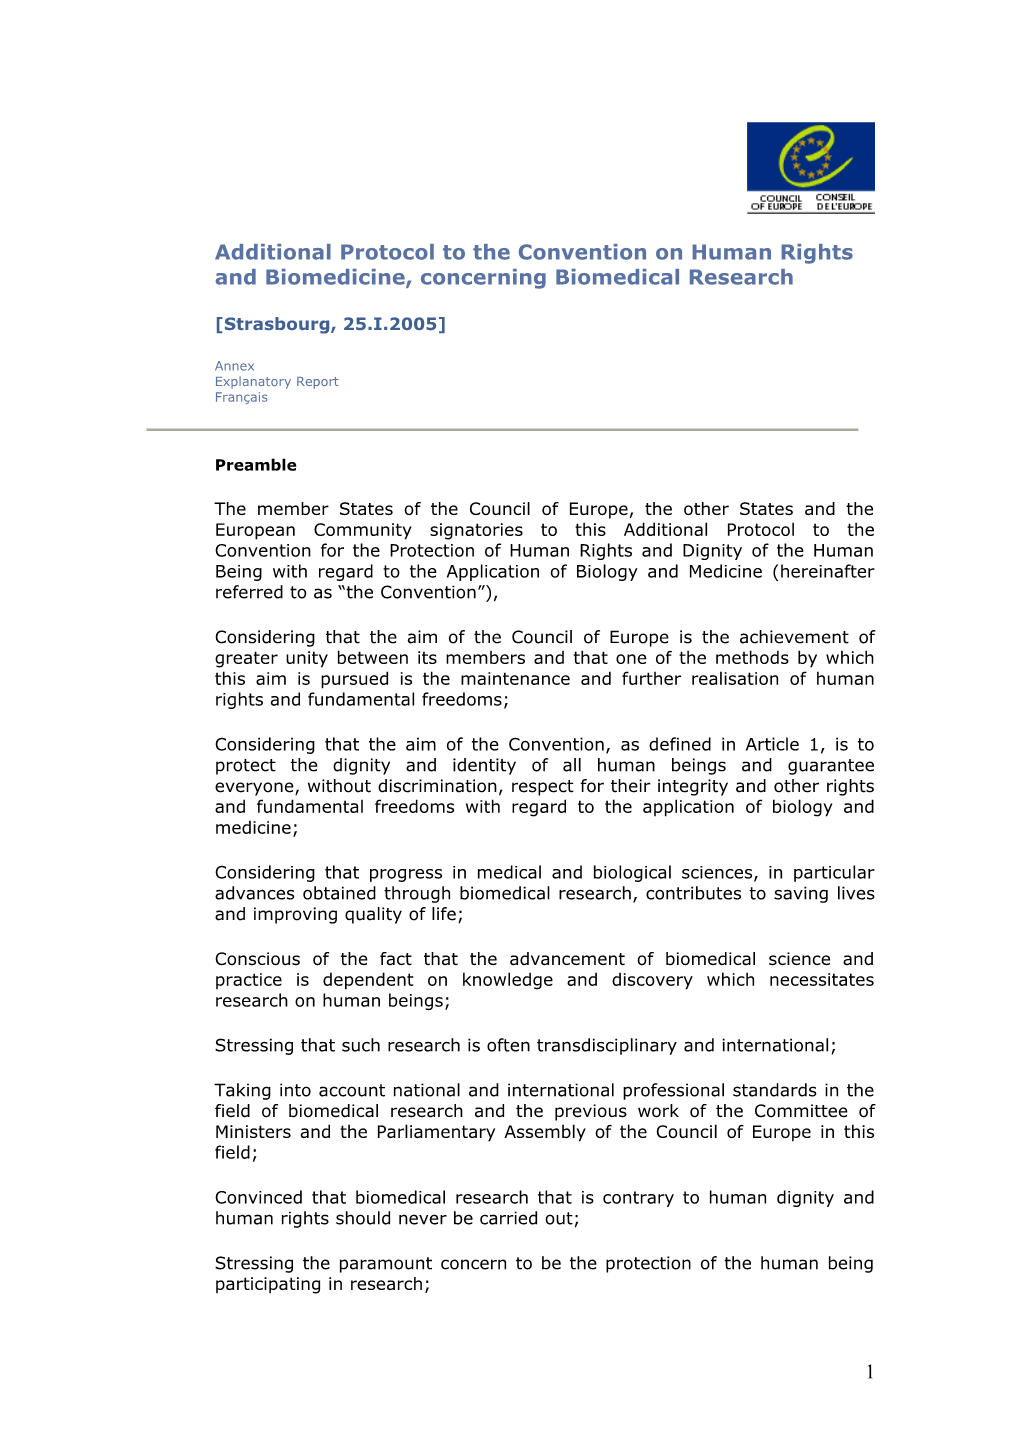 Additional Protocol to the Convention on Human Rights and Biomedicine, Concerning Biomedical